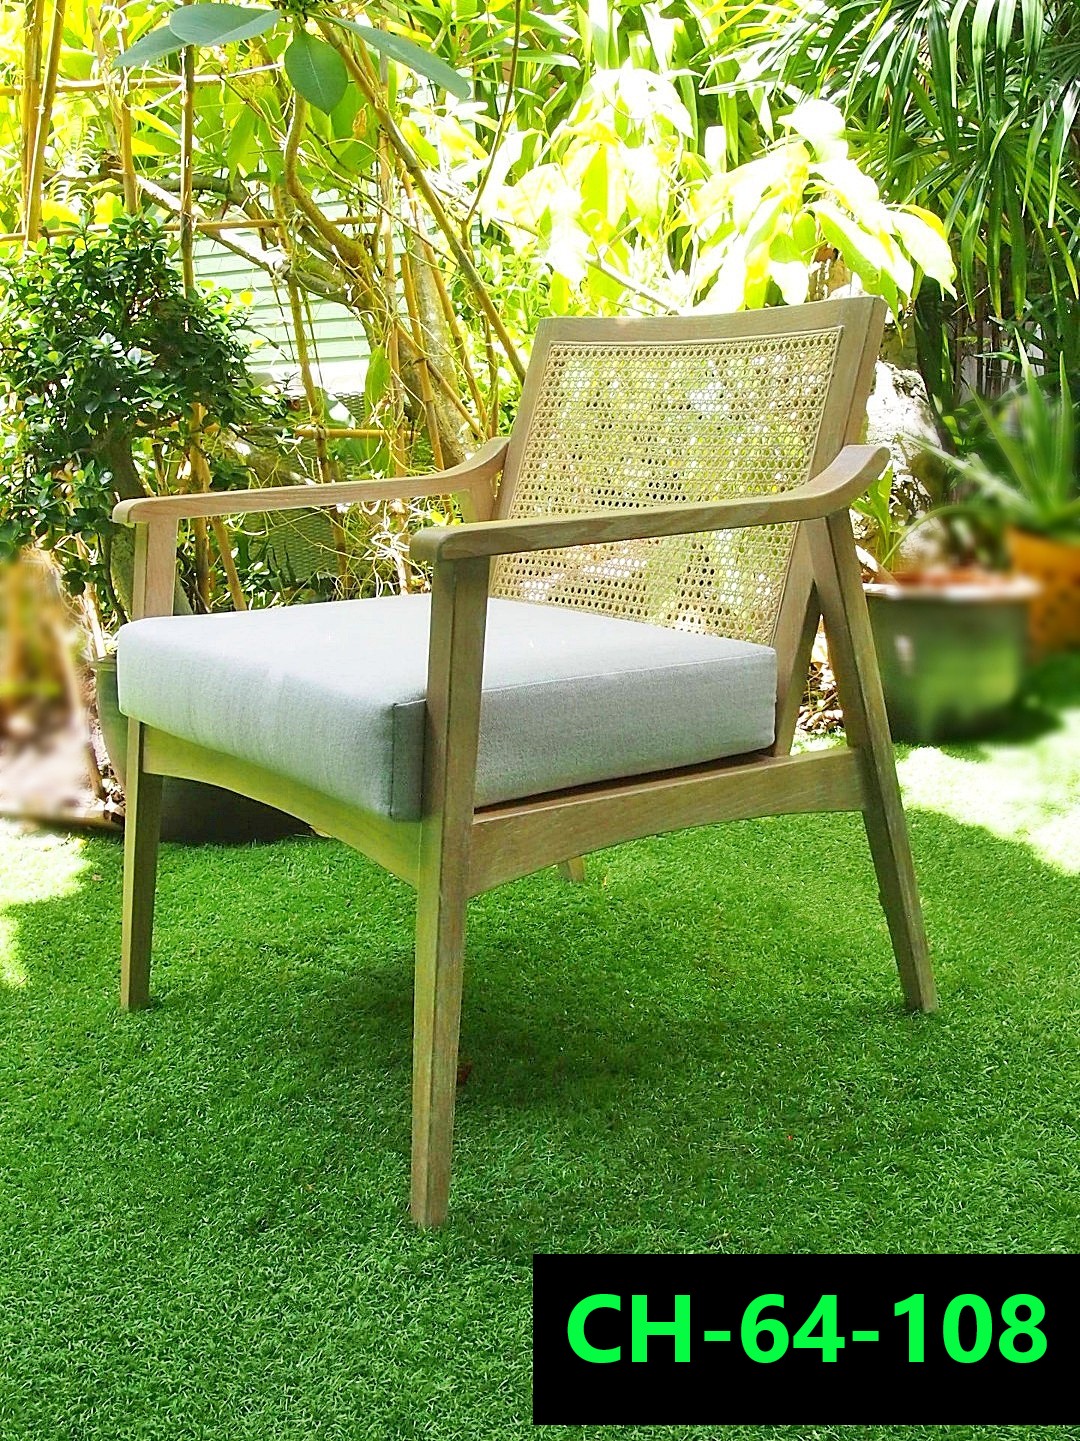 Rattan Chair set Product code CH-64-108